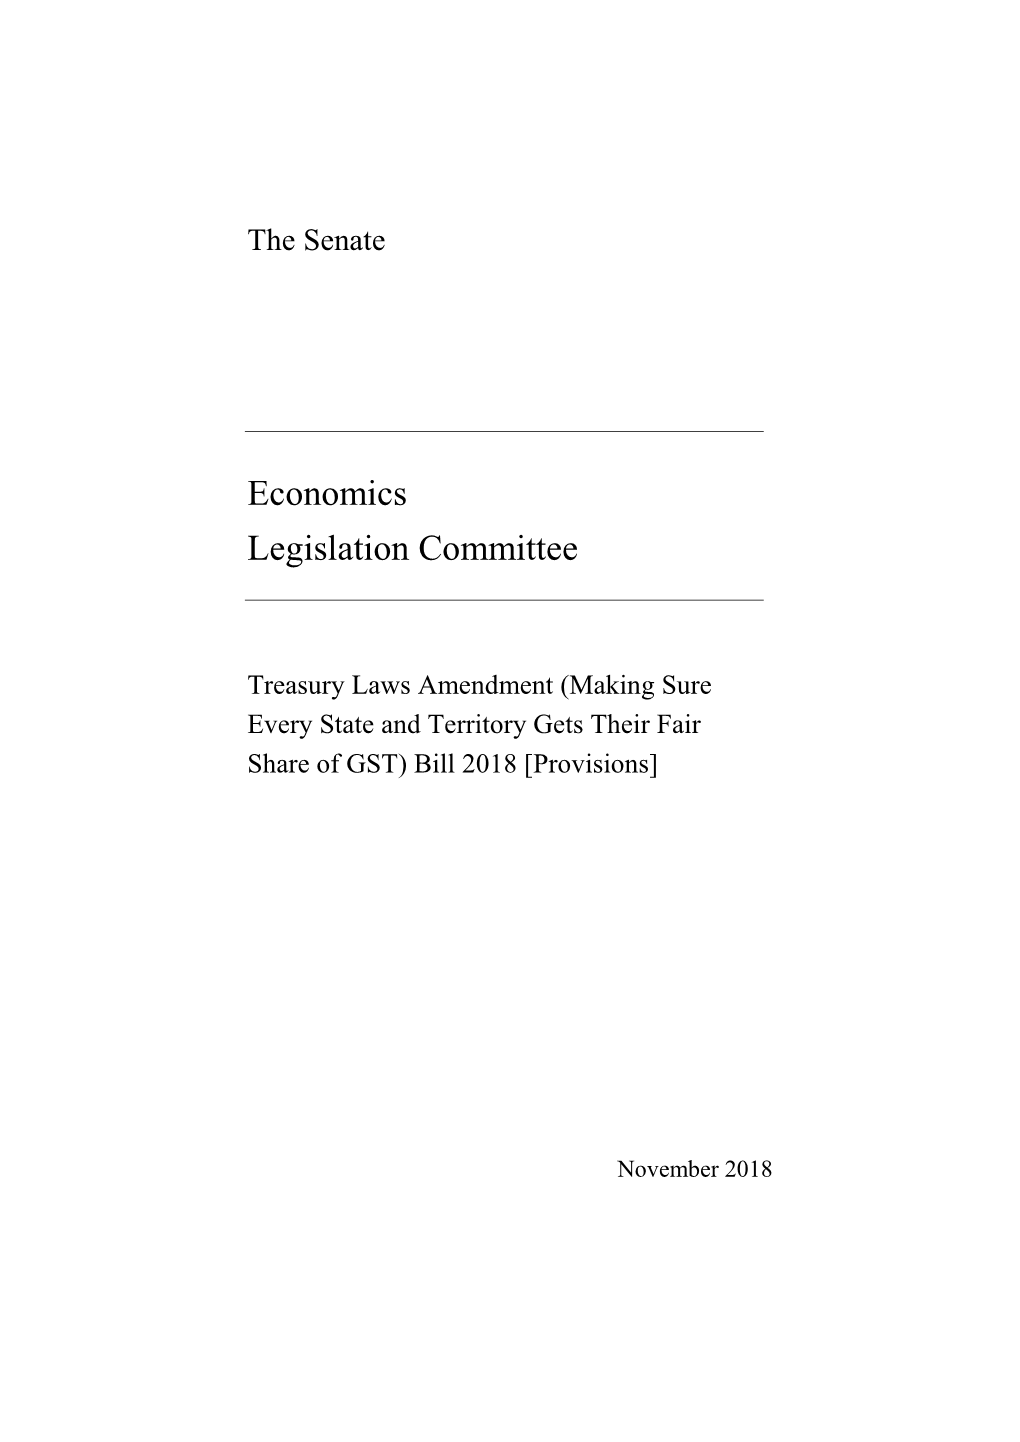 Report: Treasury Laws Amendment (Making Sure Every State And